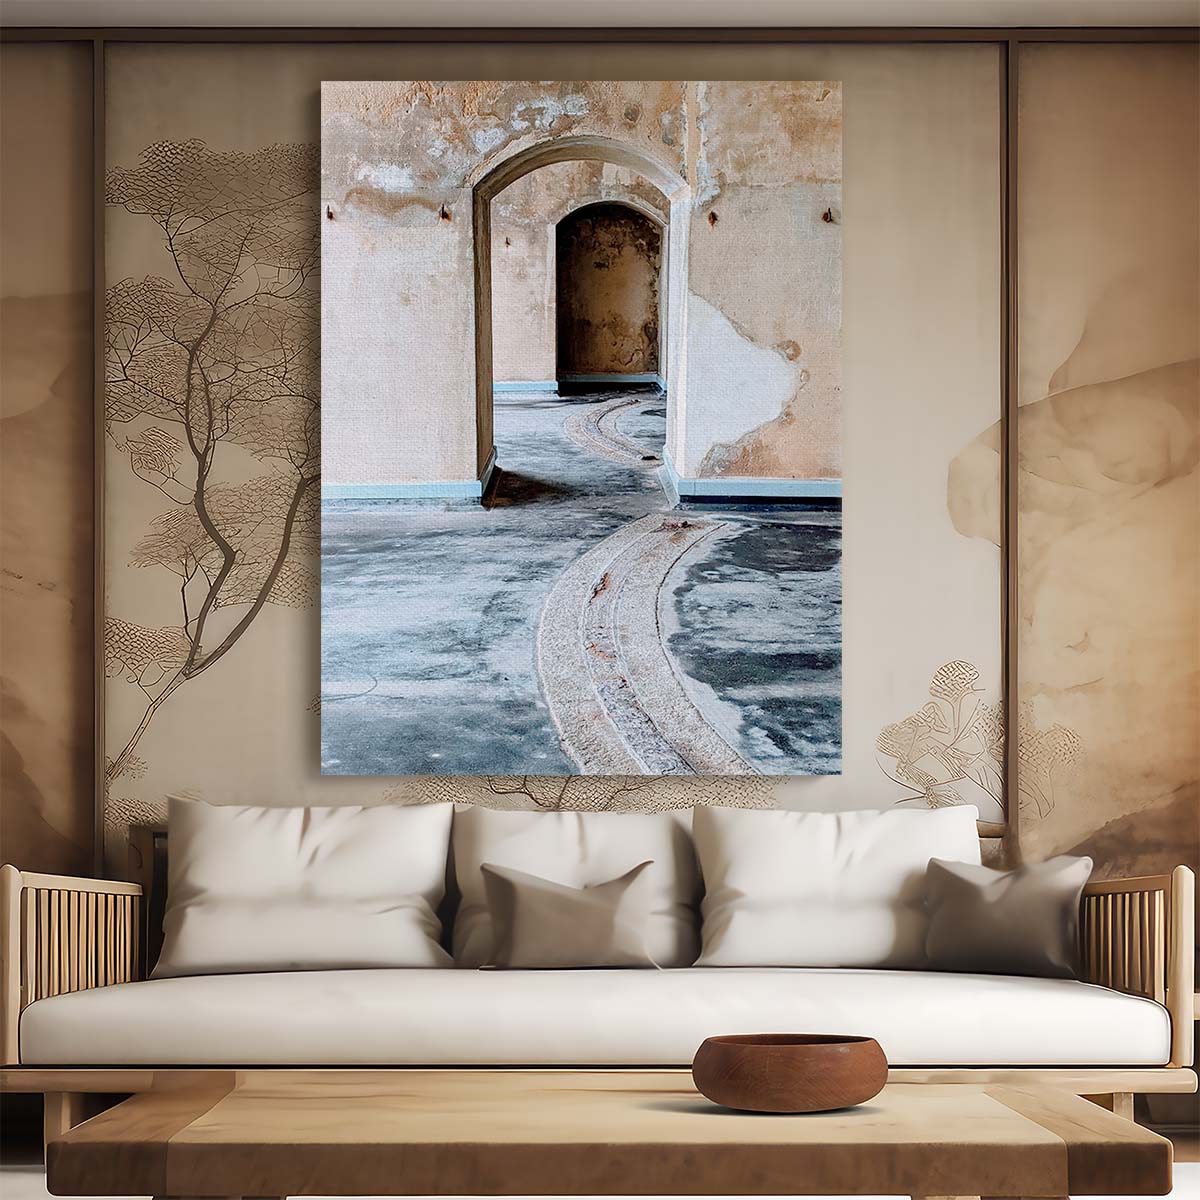 Abandoned Portsmouth Architectural Photography Interior Archways Wall Art by Luxuriance Designs, made in USA